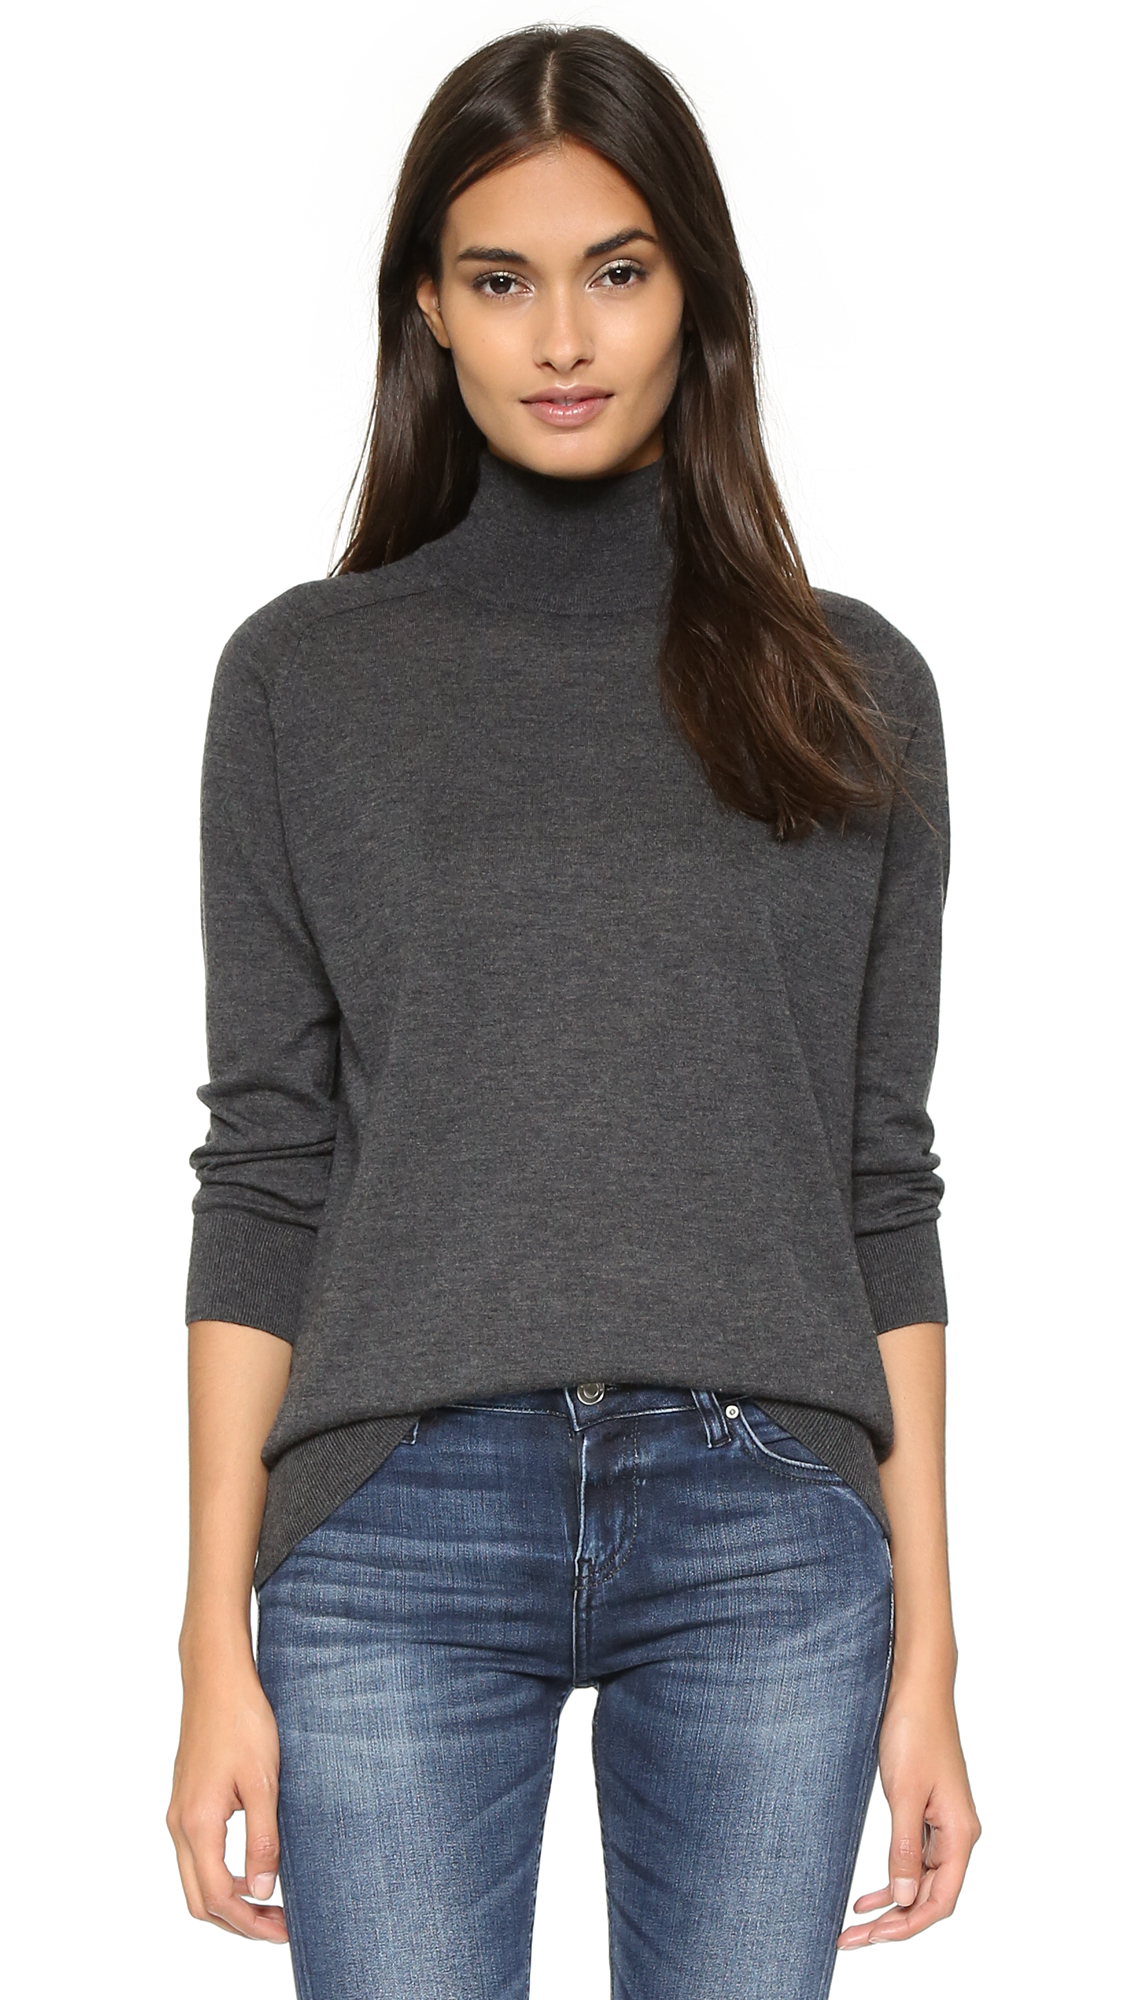 Autumn Cashmere Cashmere Mock Neck Sweater in Gray - Lyst